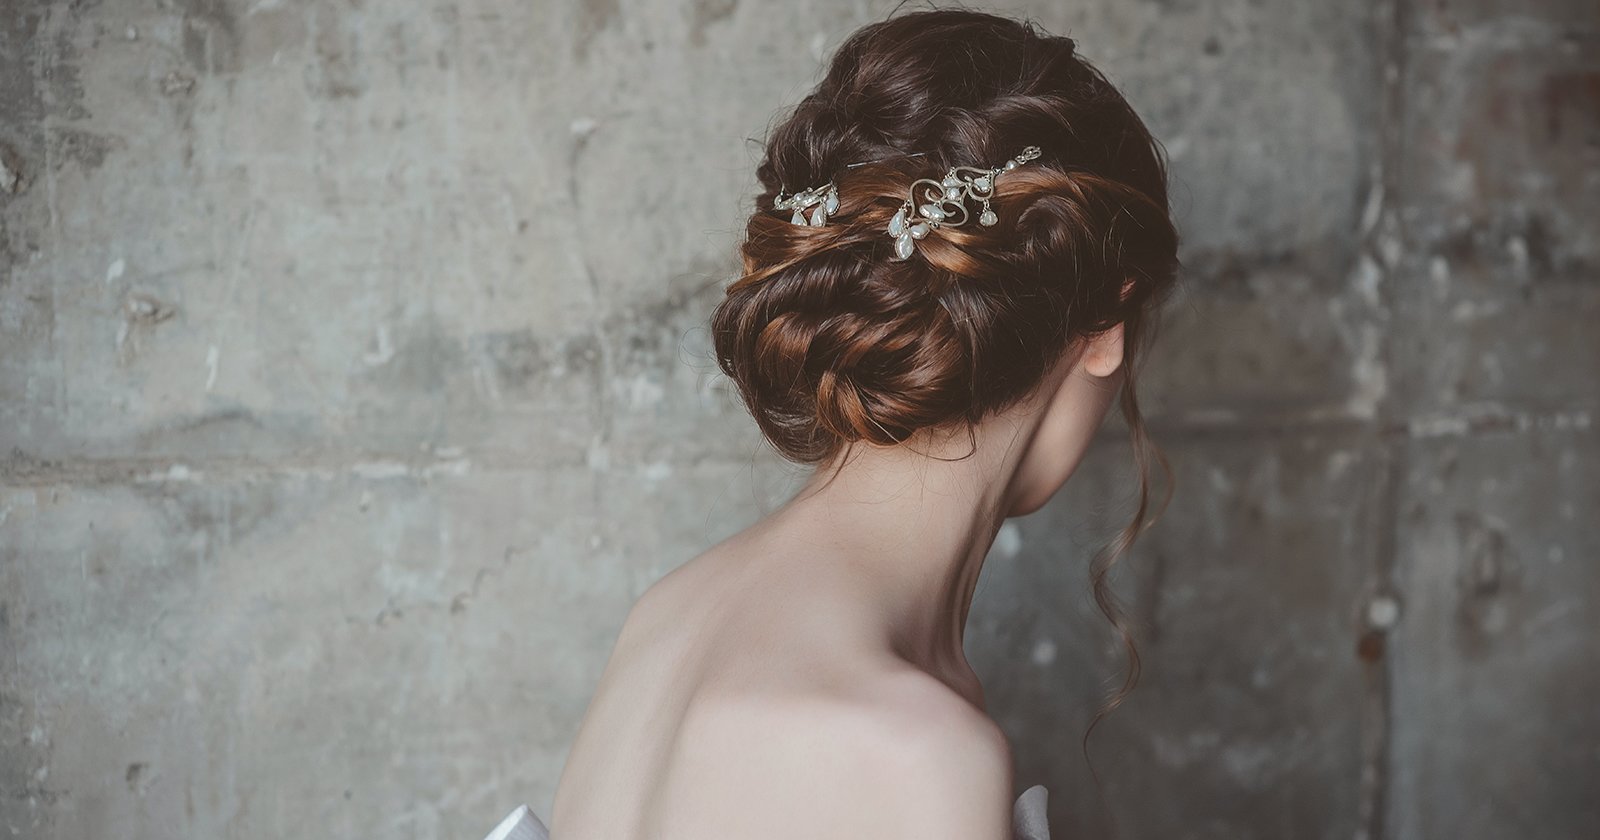 Prettiest Wedding Hairstyles for Every Bridal Style | David's Bridal Blog